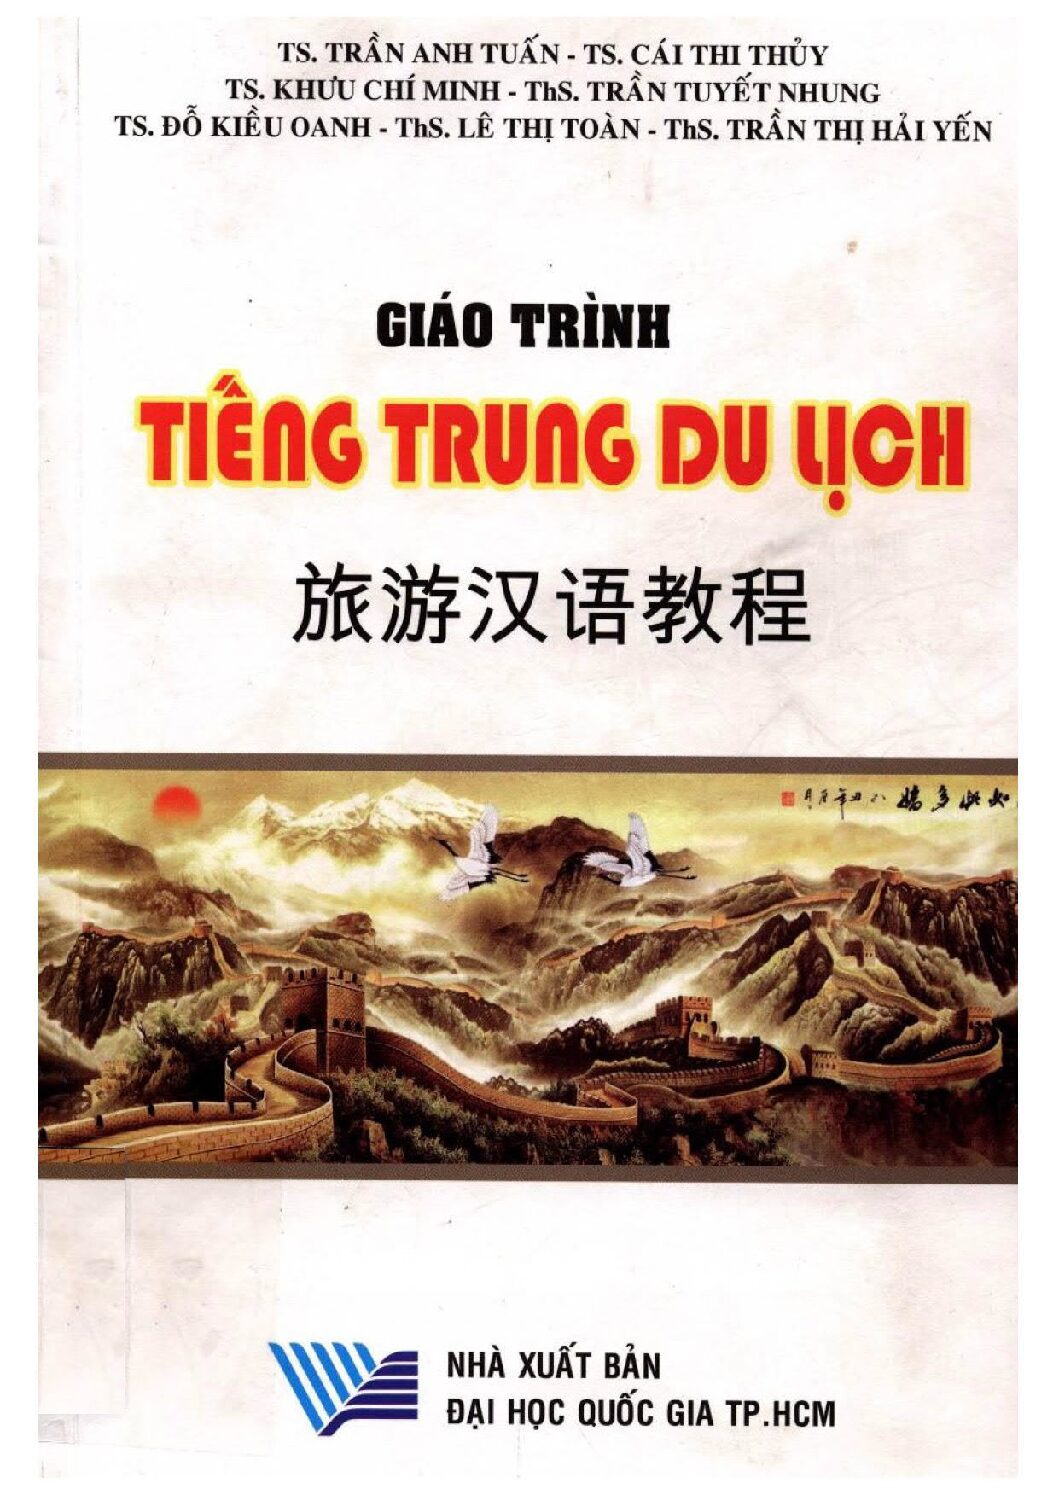 Pages From Pages From Giao trinh tieng trung du lich anh pdf